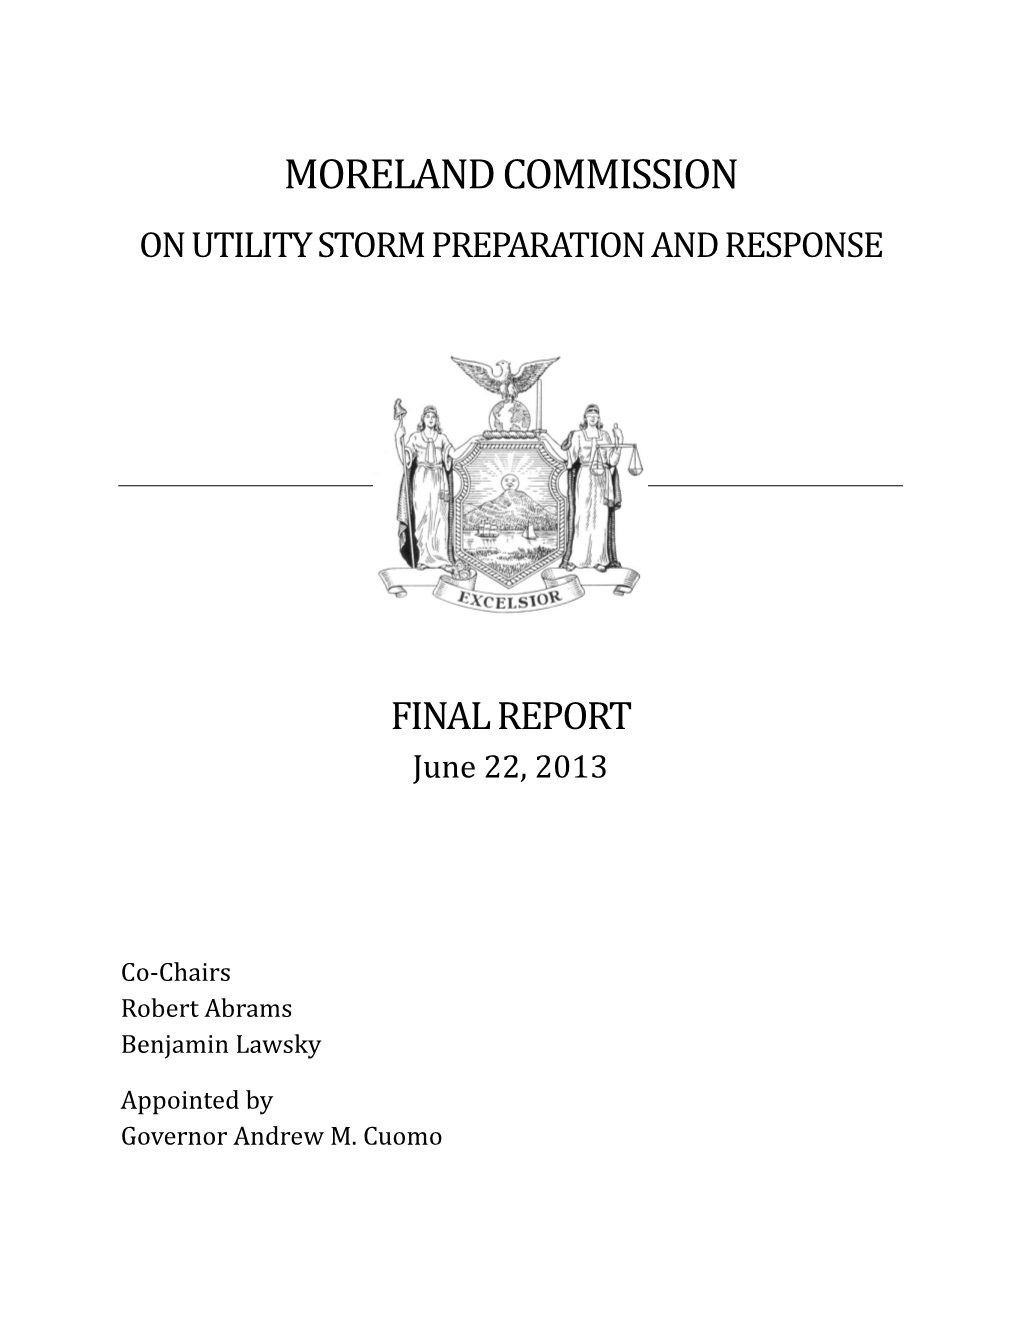 Moreland Commission on Utility Storm Preparation and Response